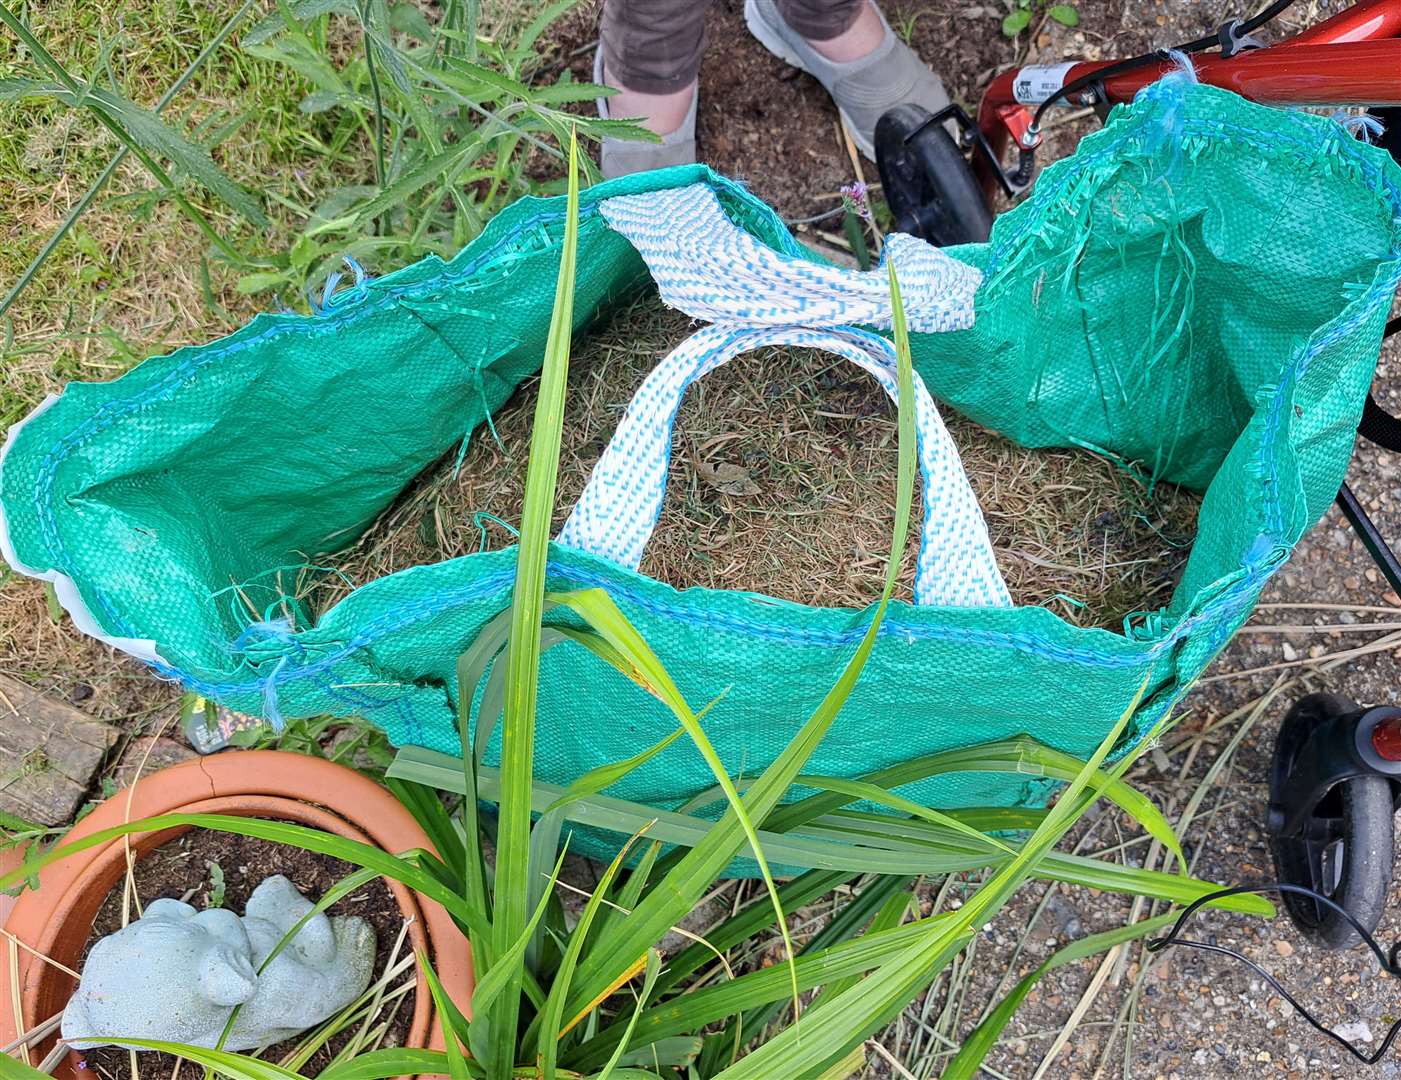 The bag of grass cuttings dumped in Patricia Mayberry's garden in Deal